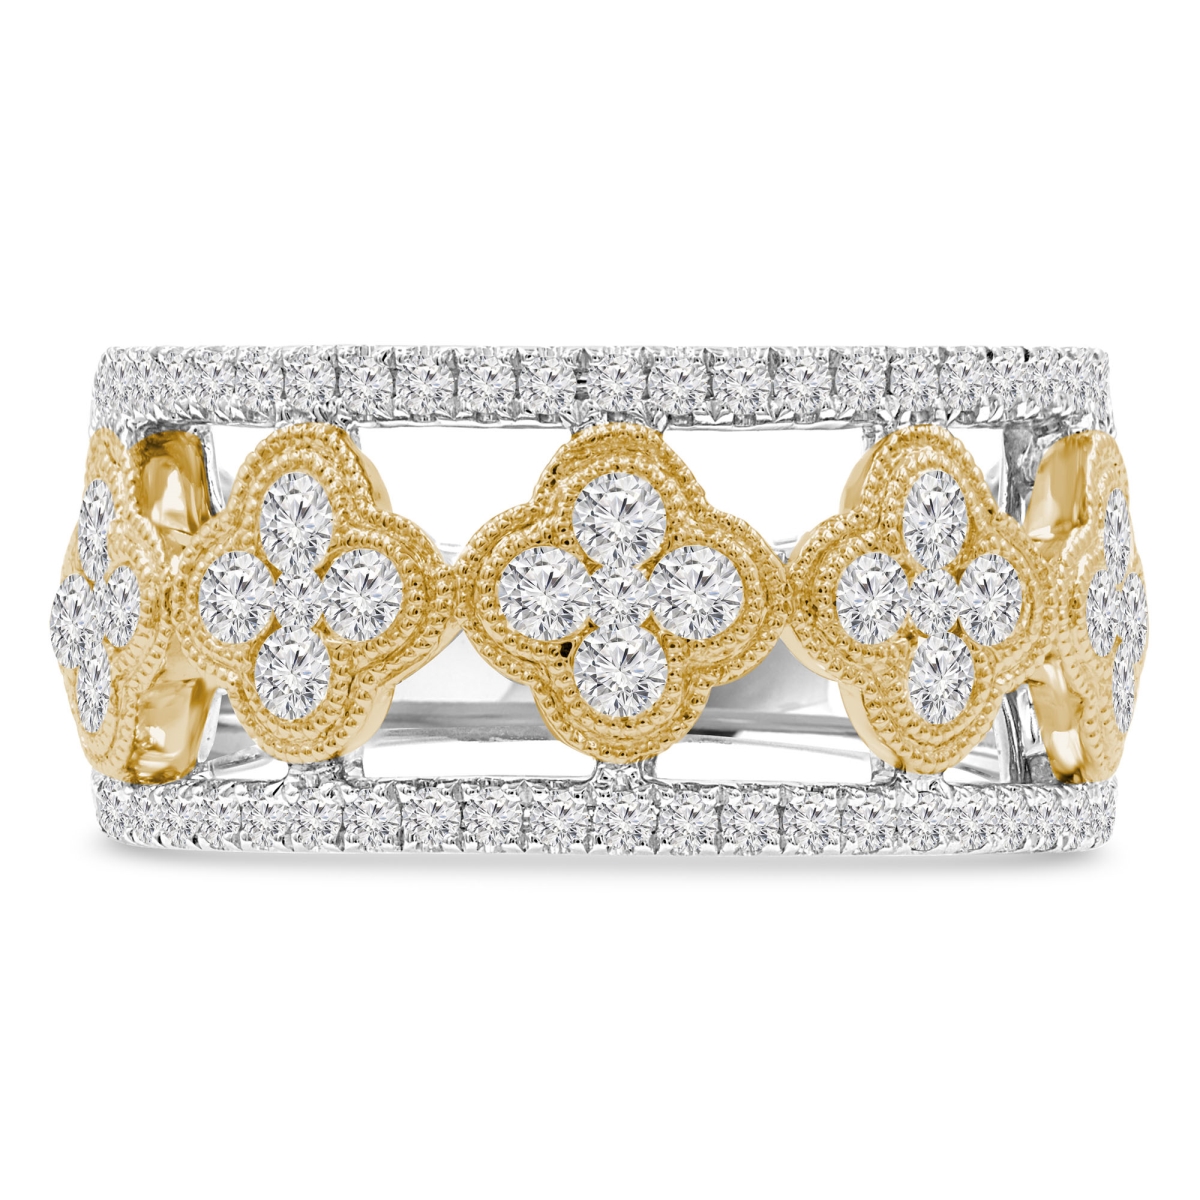 Picture of Majesty Diamonds MDR210140-4.5 1 CTW Round Diamond Cocktail Ring in 14K Two-Tone Gold - Size 4.5